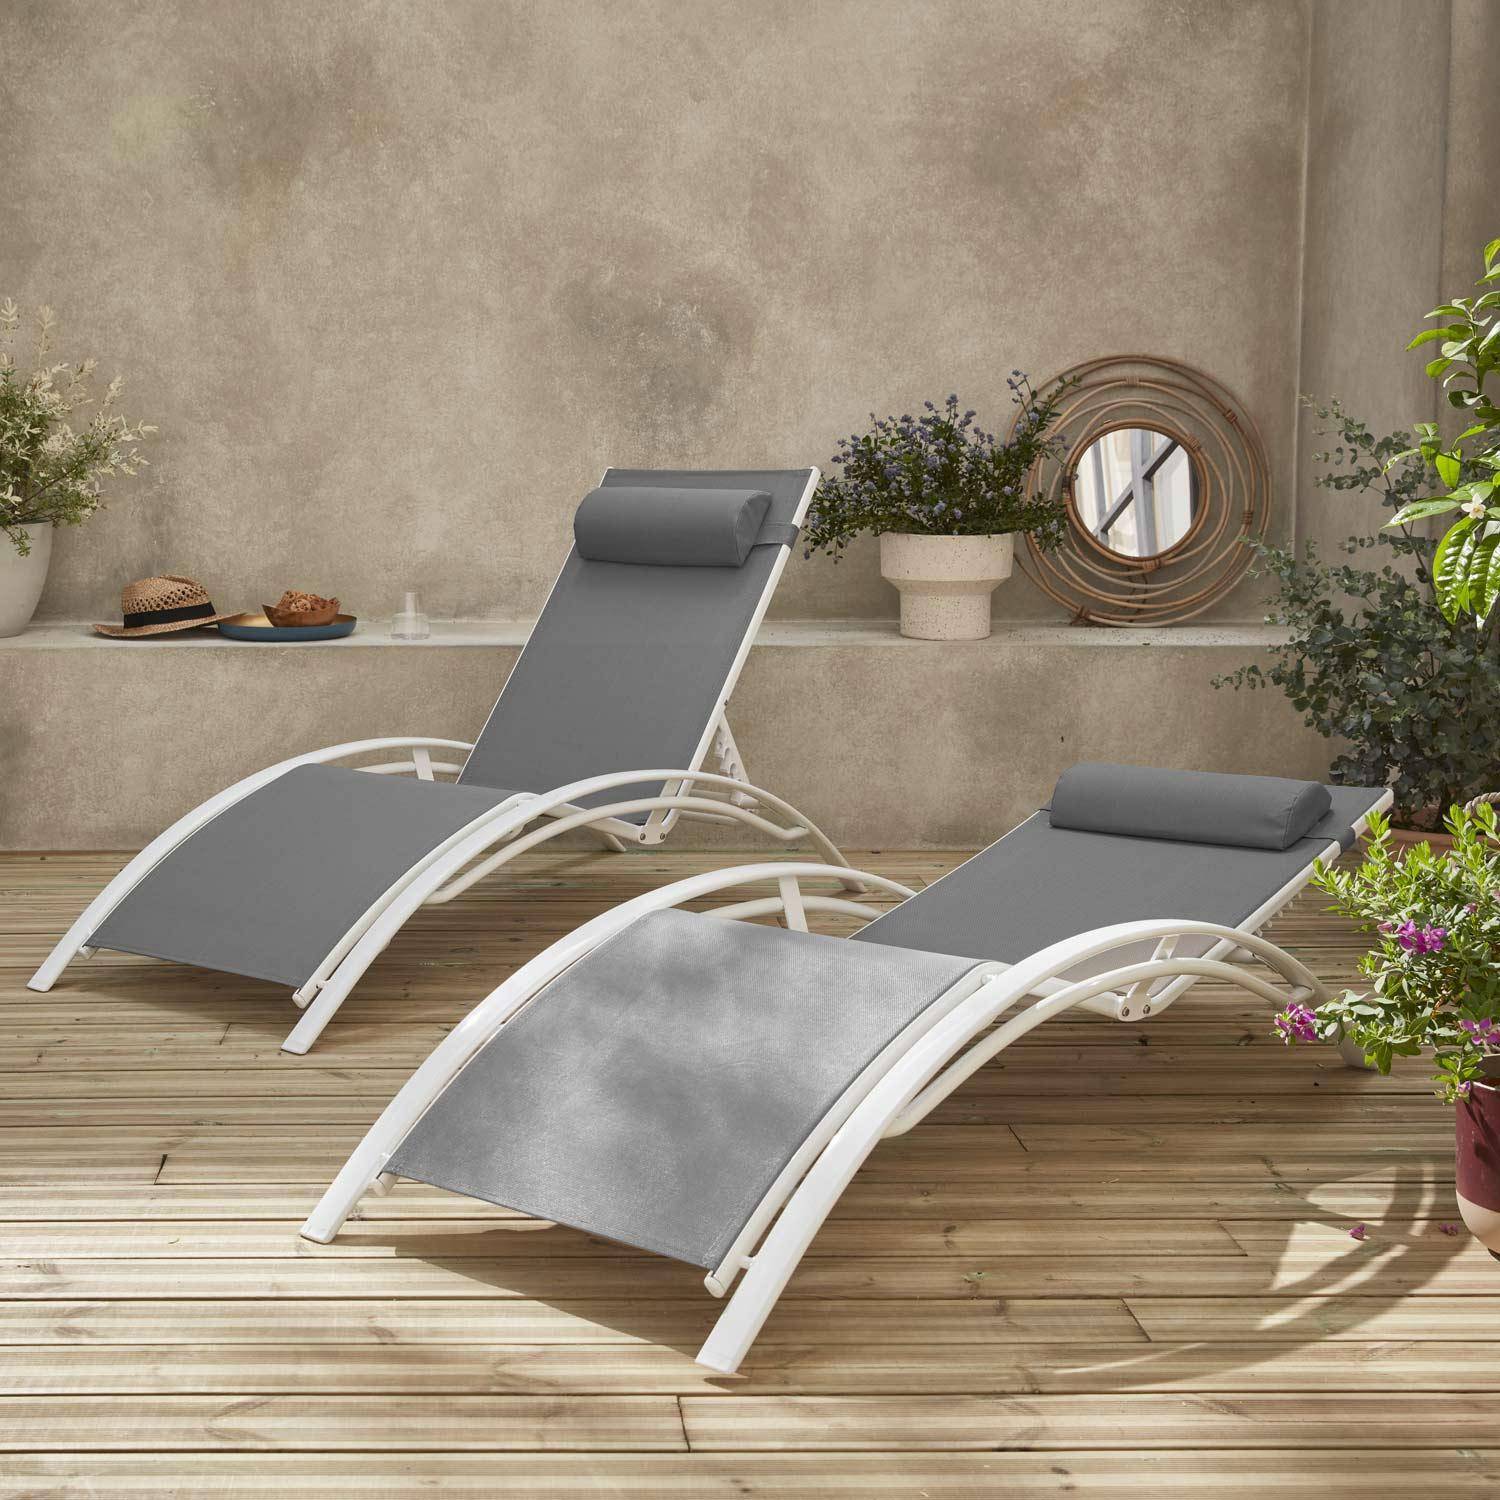 Pair of aluminium and textilene sun loungers, 4 reclining positions, headrest included, stackable - Louisa - White frame, Grey textilene,sweeek,Photo1